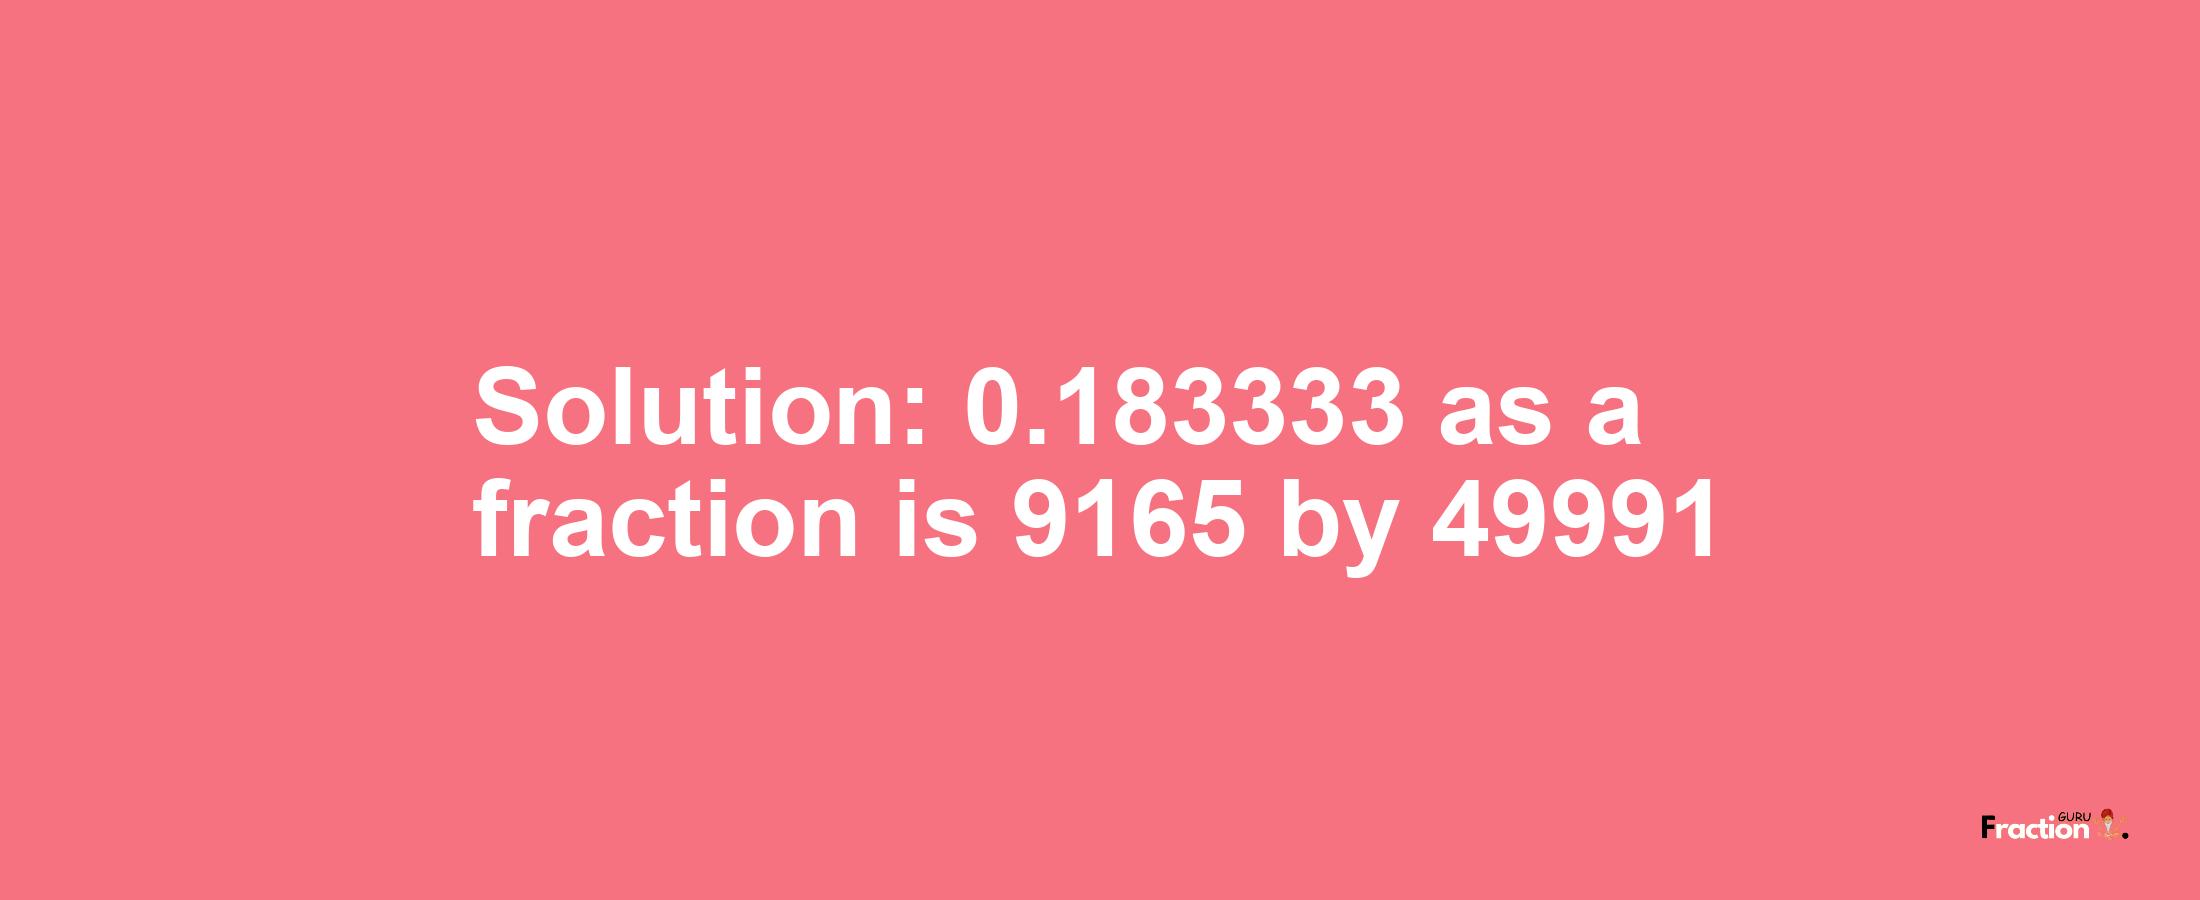 Solution:0.183333 as a fraction is 9165/49991